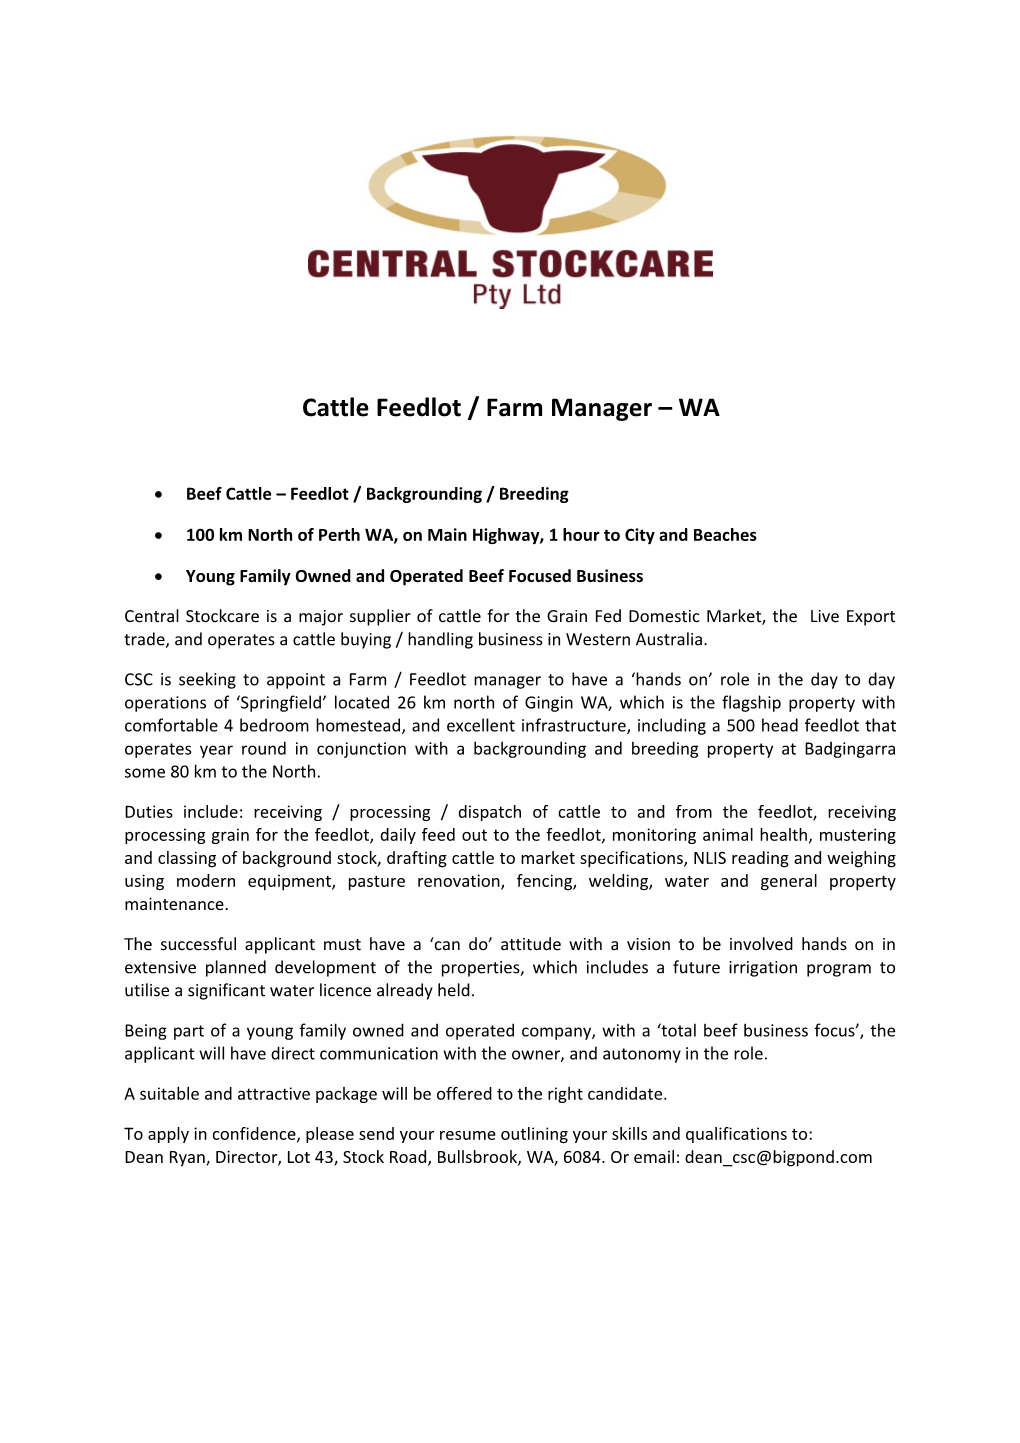 Cattle Feedlot / Farm Manager WA